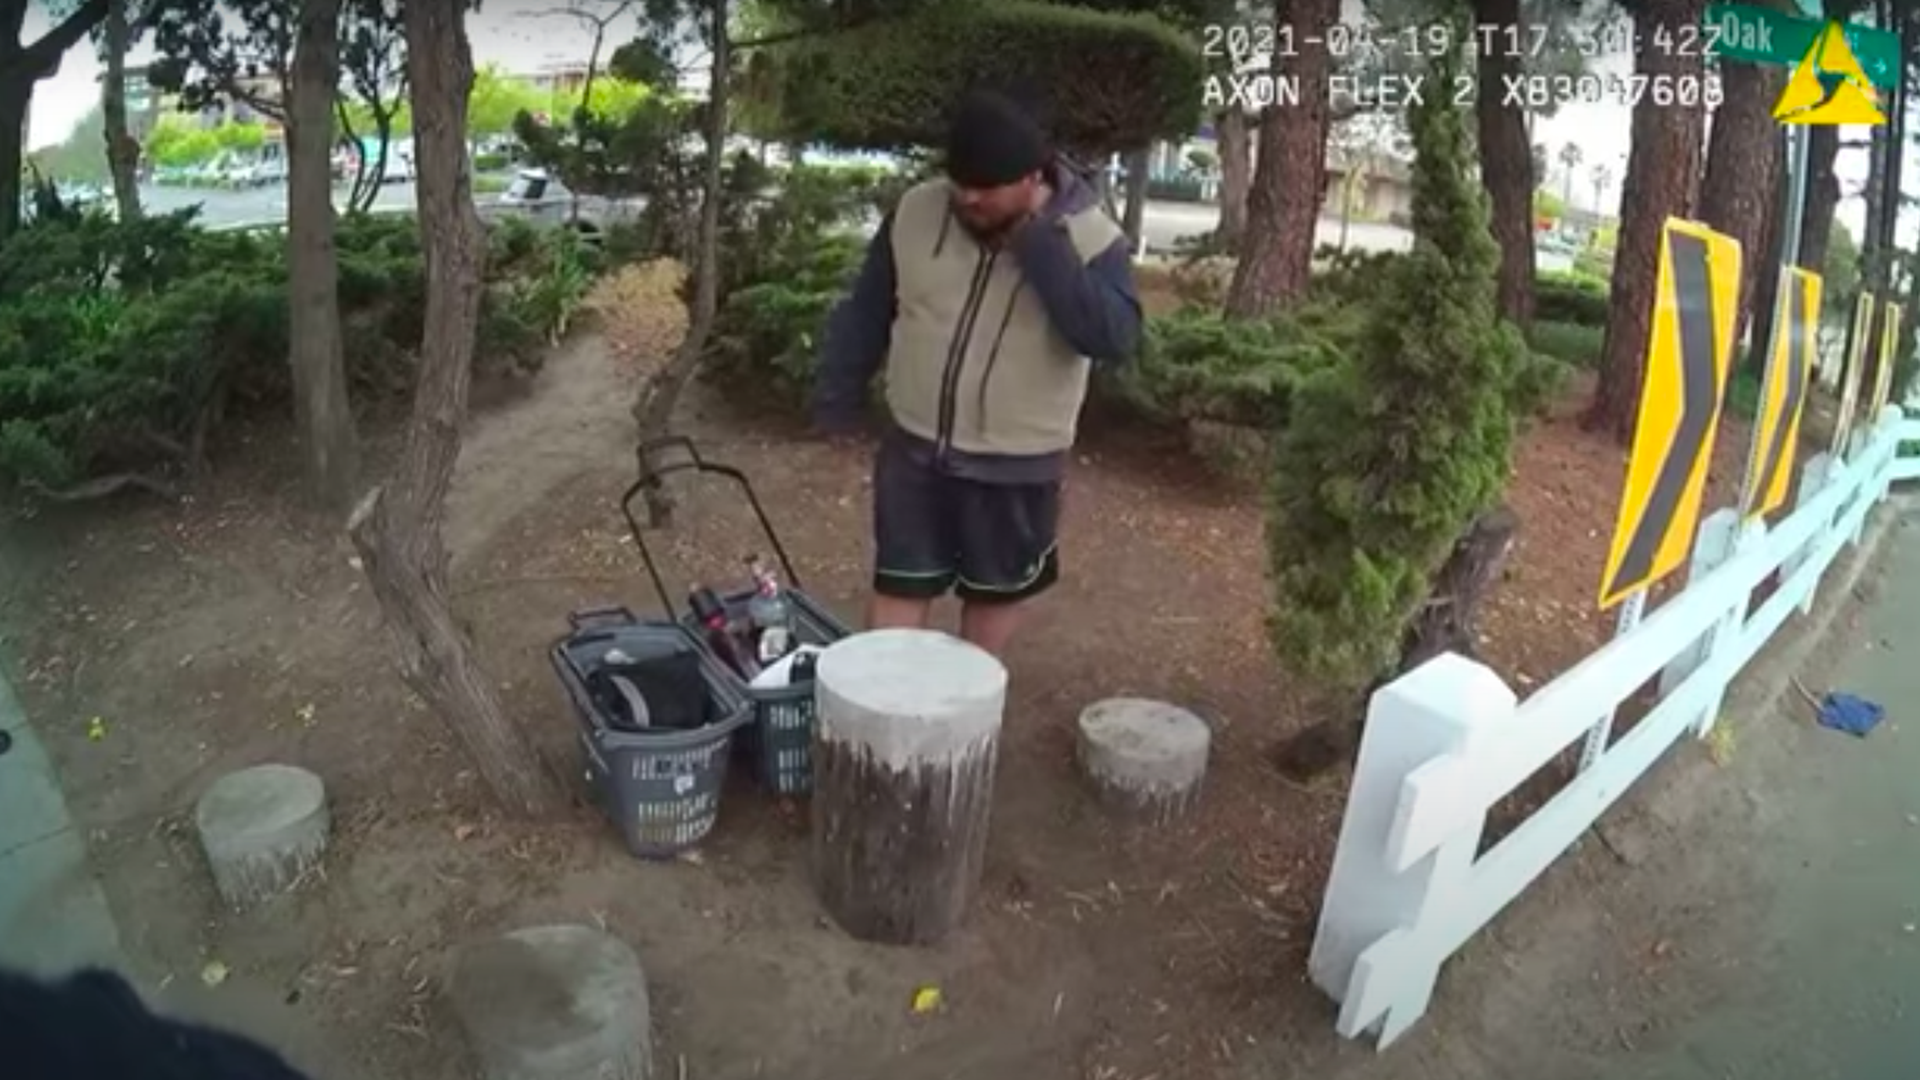 Mario Arenales Gonzalez stands in a park, as seen on body camera footage